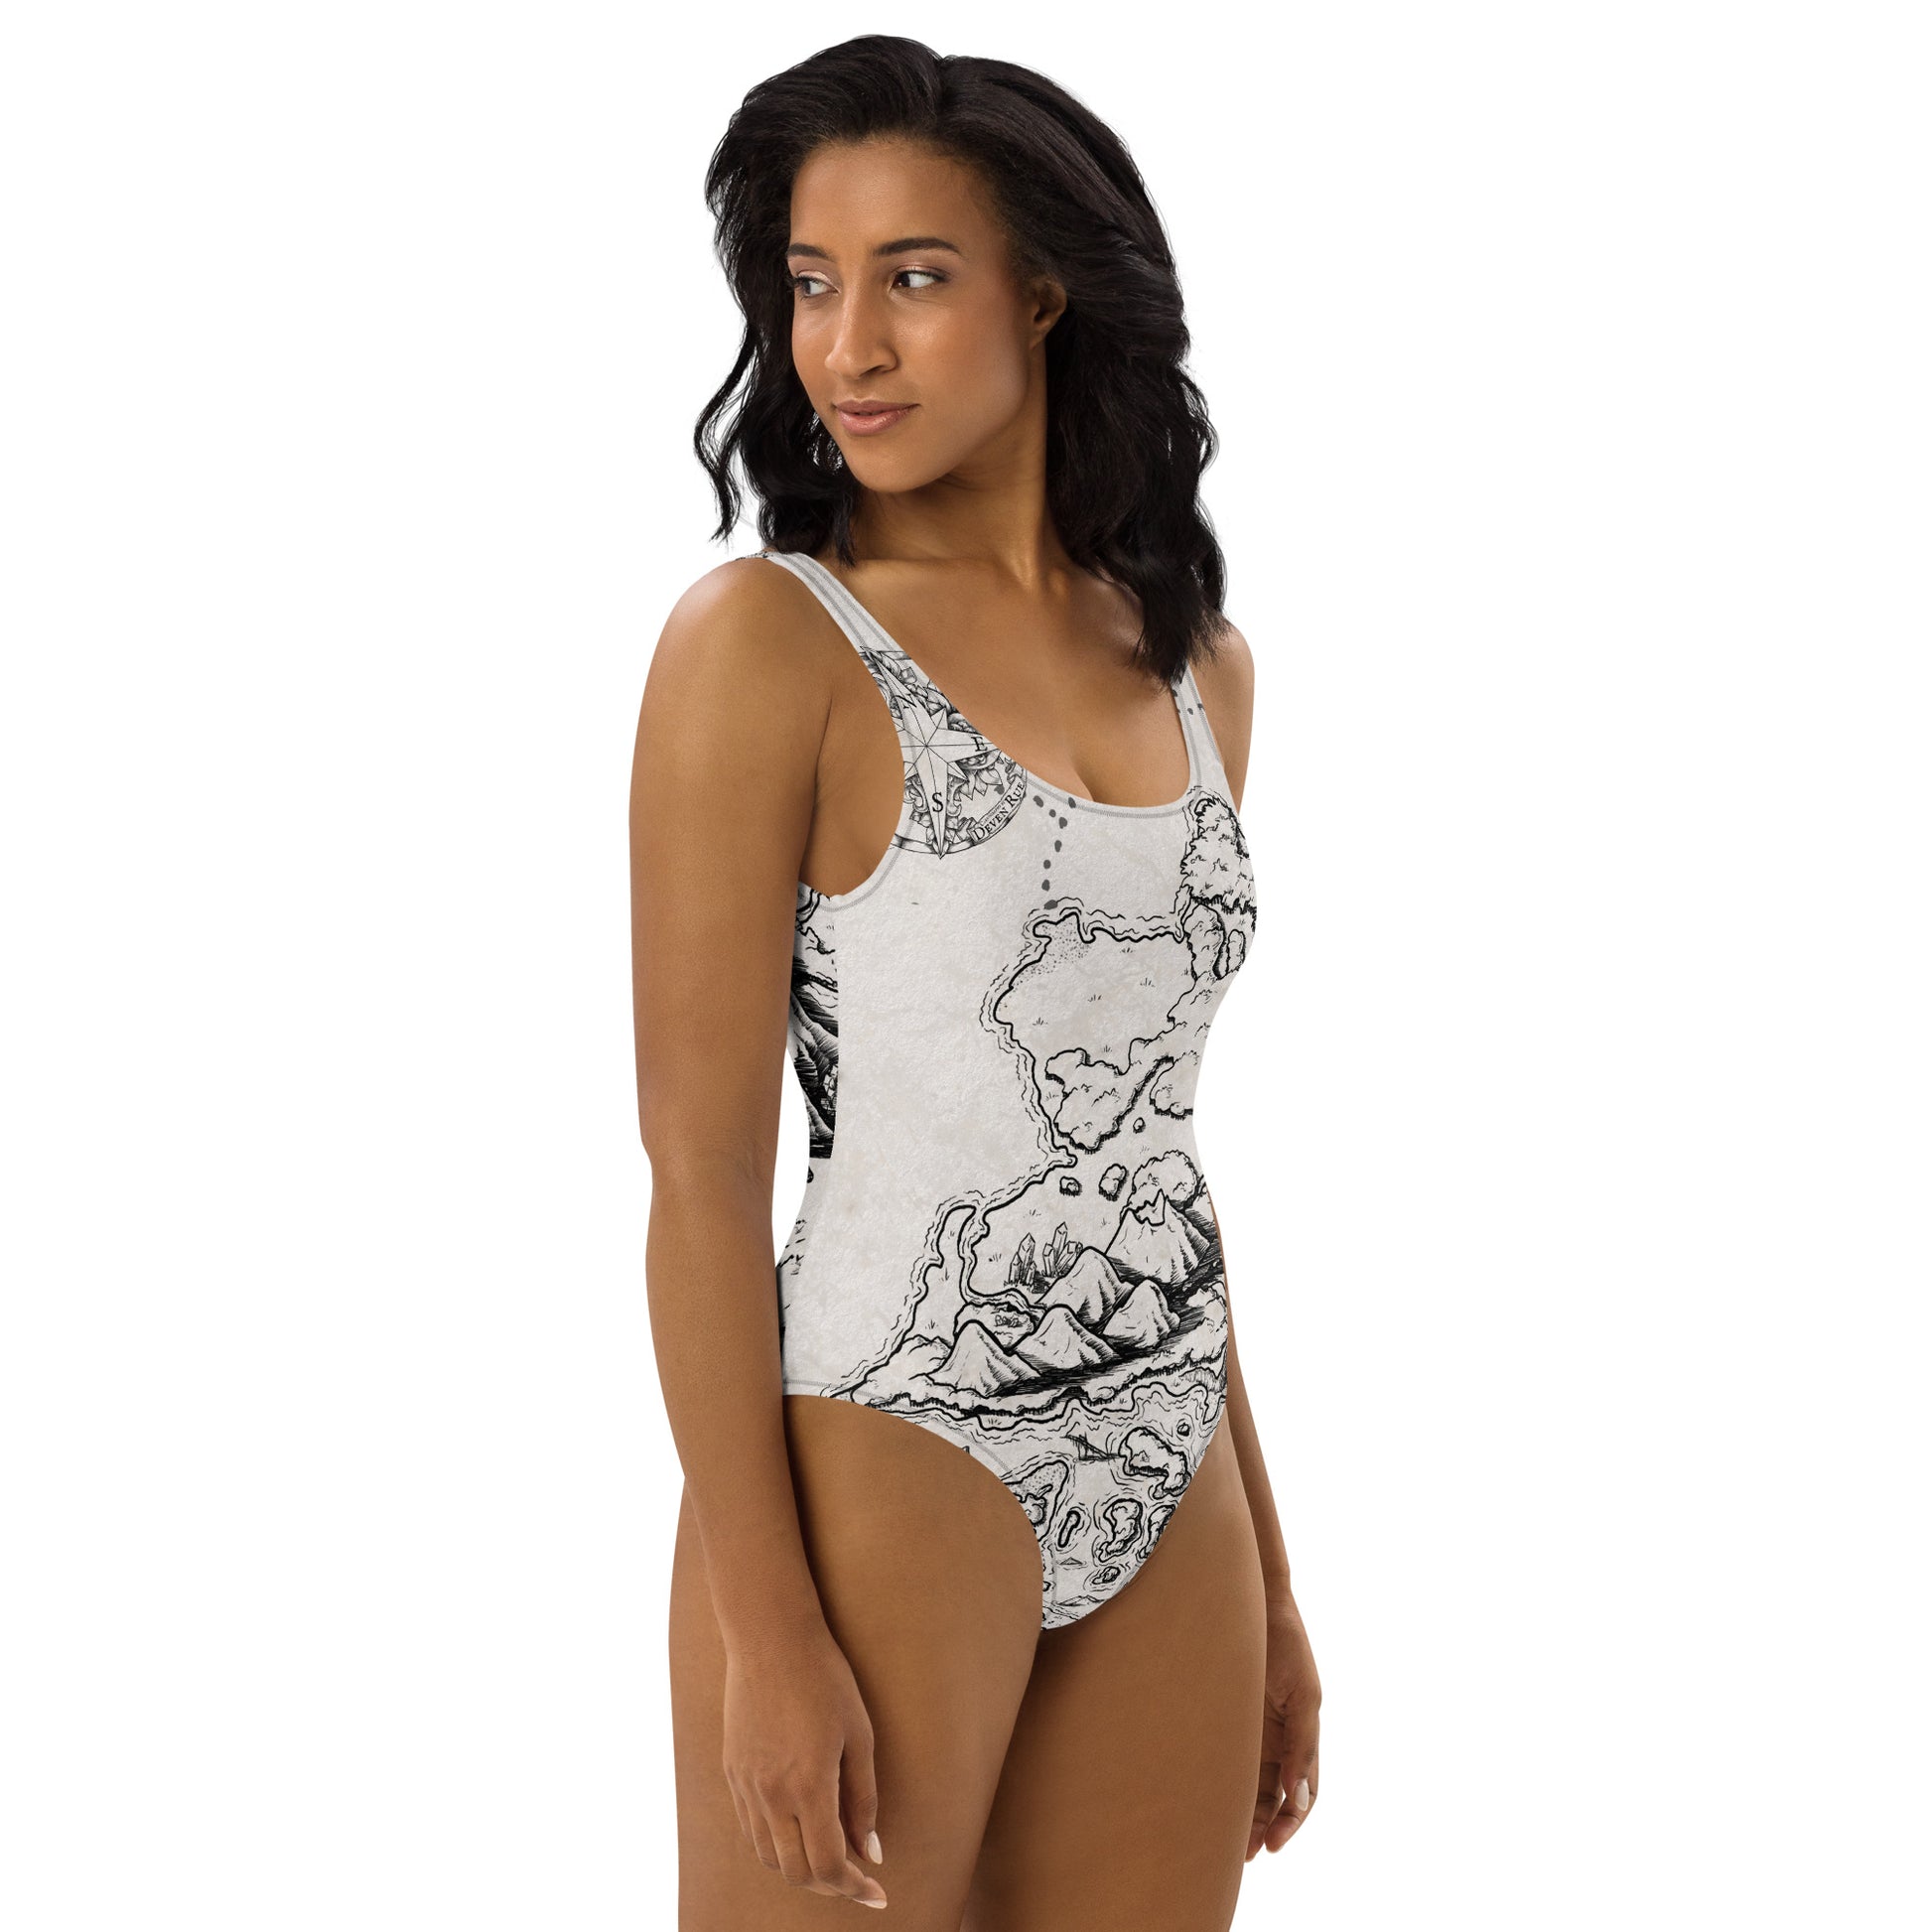 A model wears the Ship Graveyard one piece swimsuit by Deven Rue, right view.